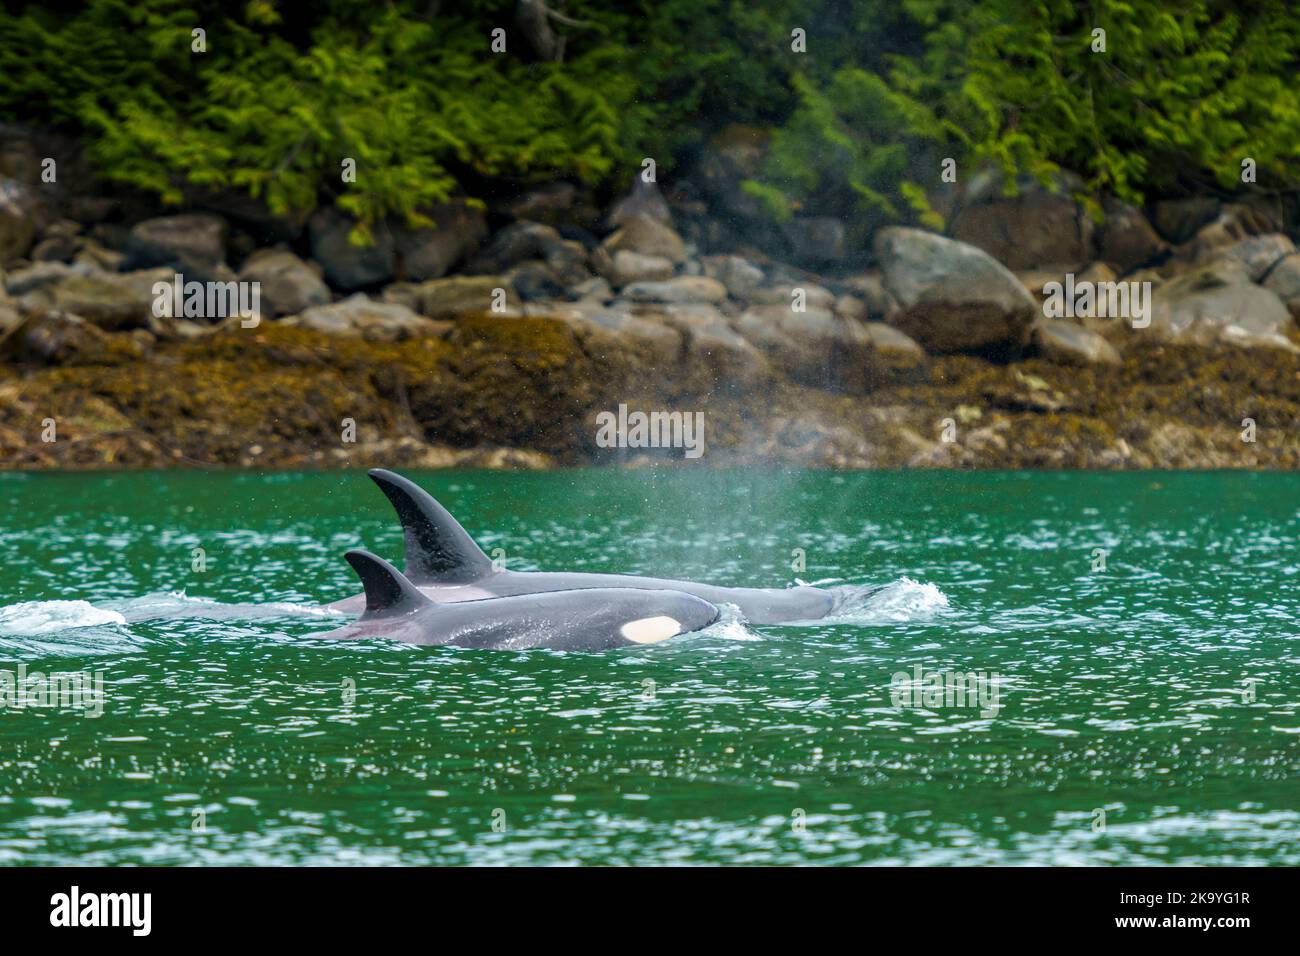 Biggs killer whales (orcas) close to the Knight Inlet shoreline, Knight Inlet, First Nations Territory, Traditional Territories of the Kwakwaka'wakw P Stock Photo